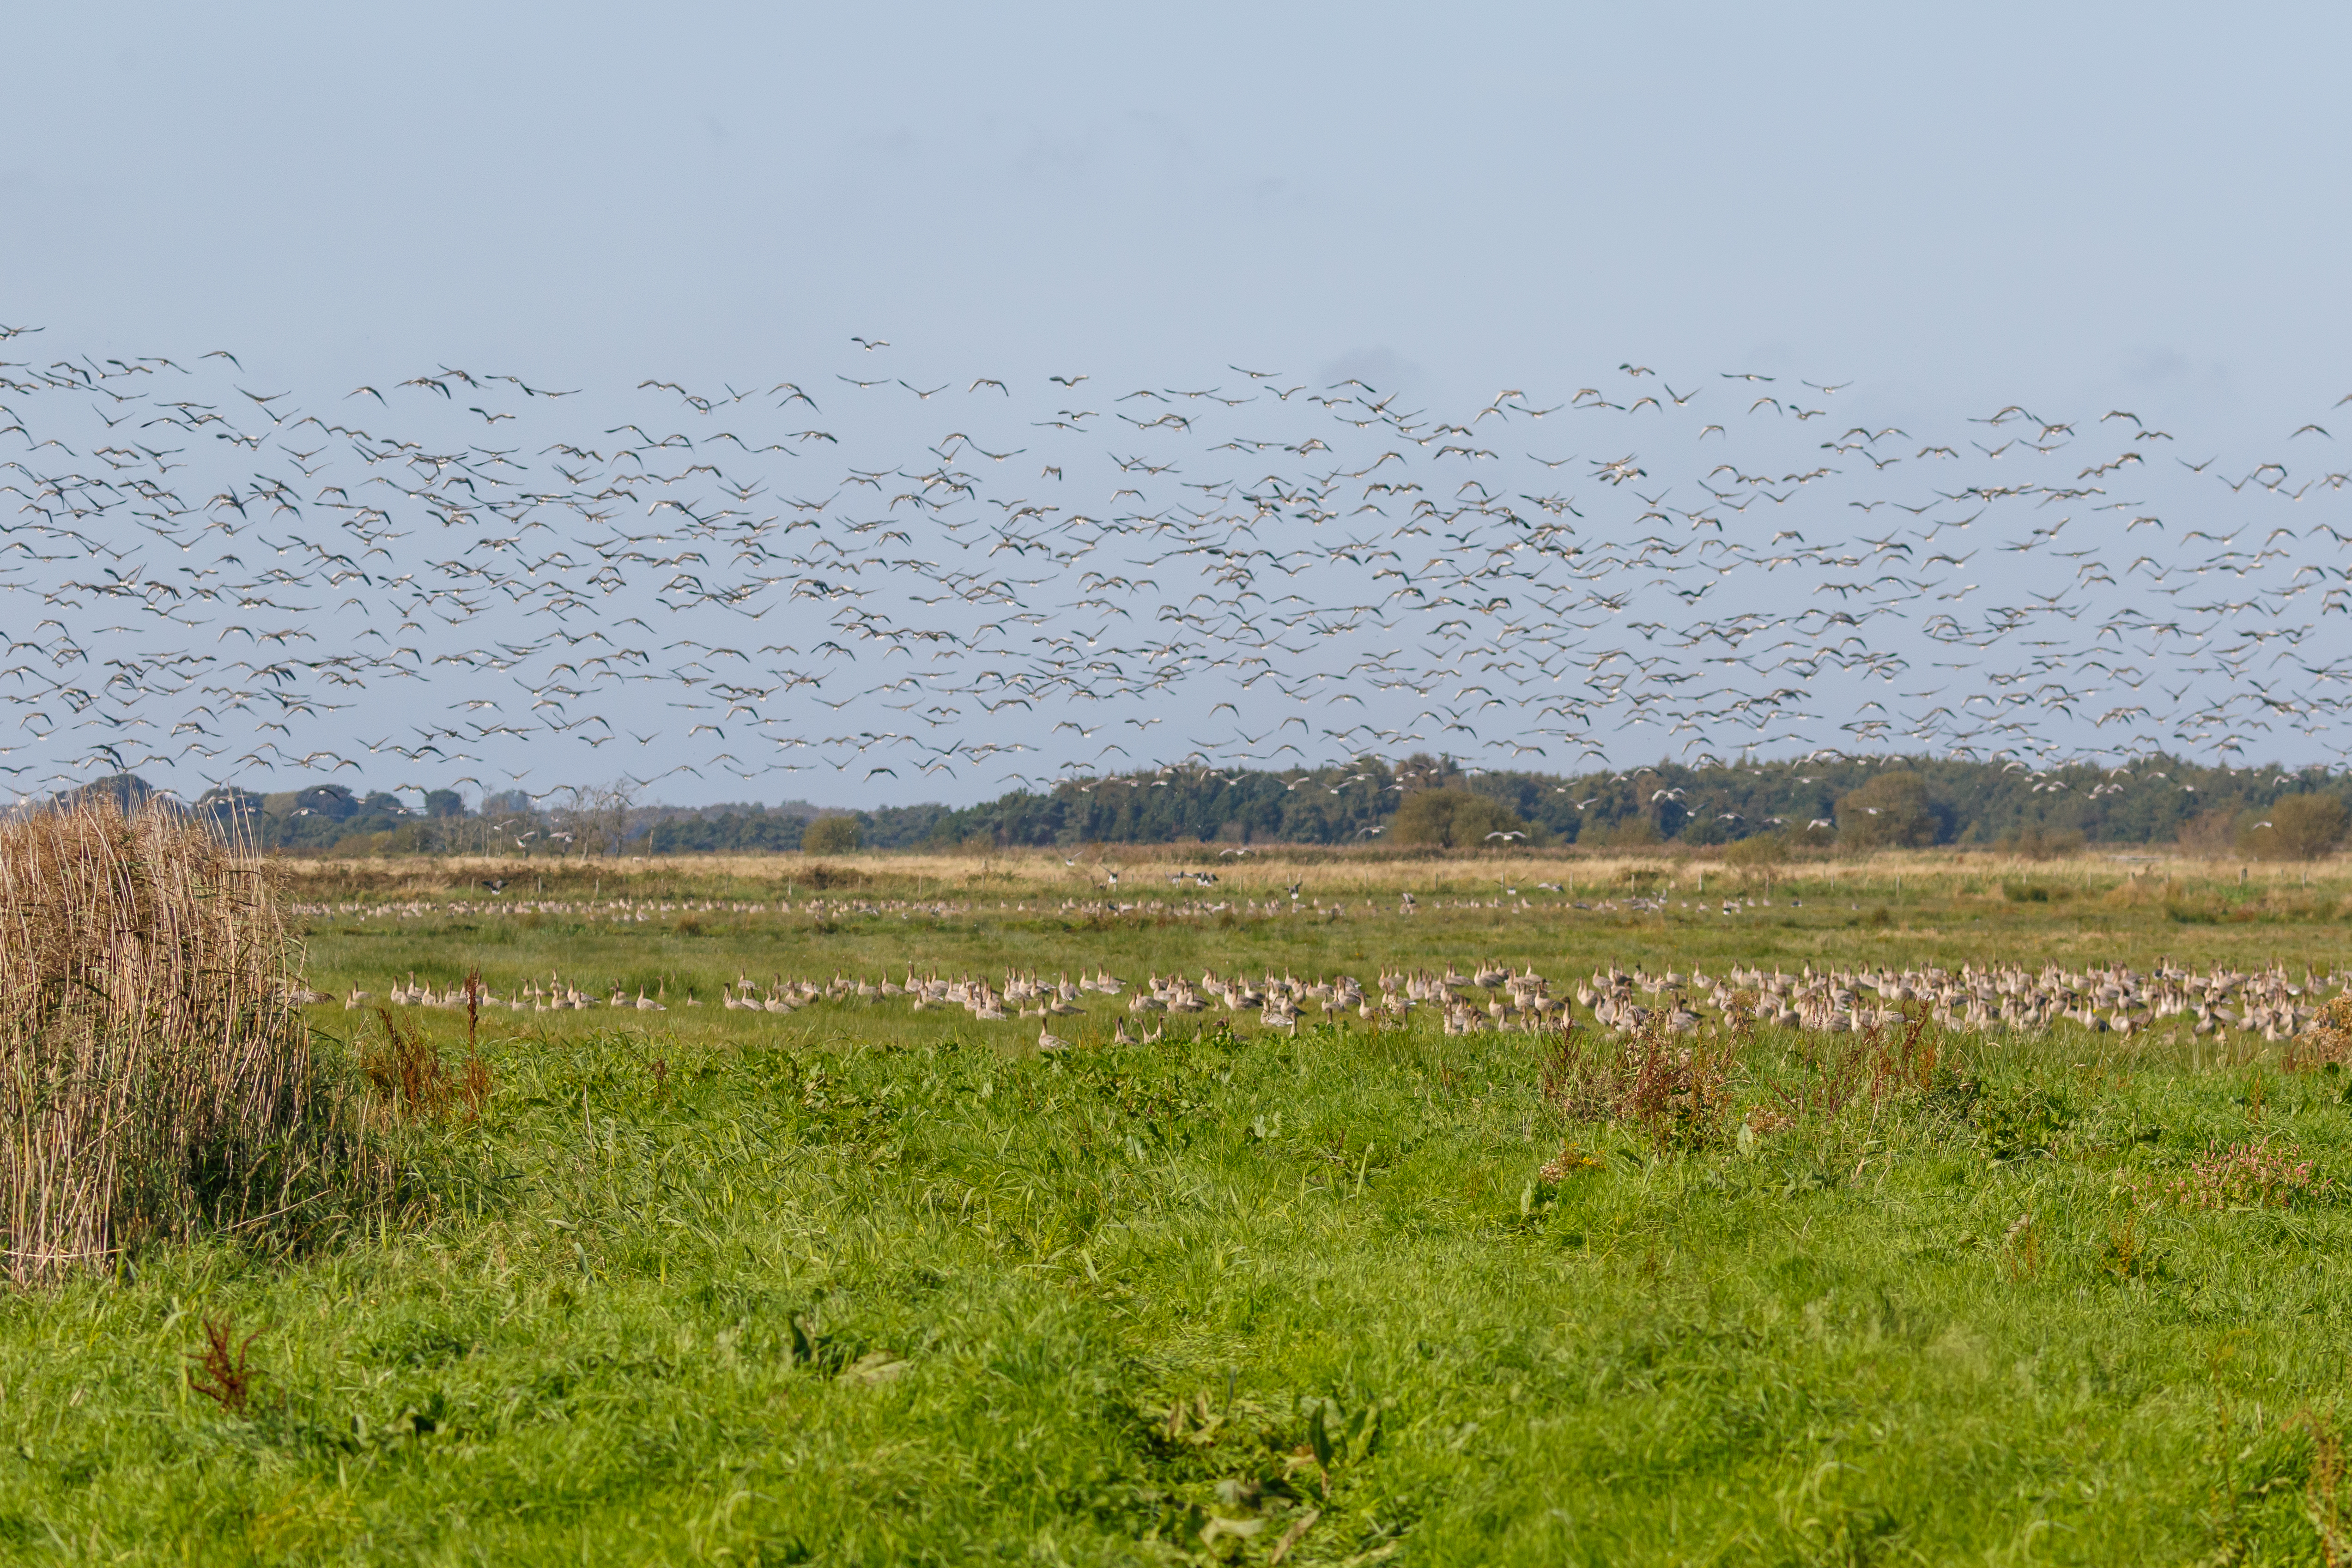 Fall for nature’s spectacle at WWT Martin Mere this autumn